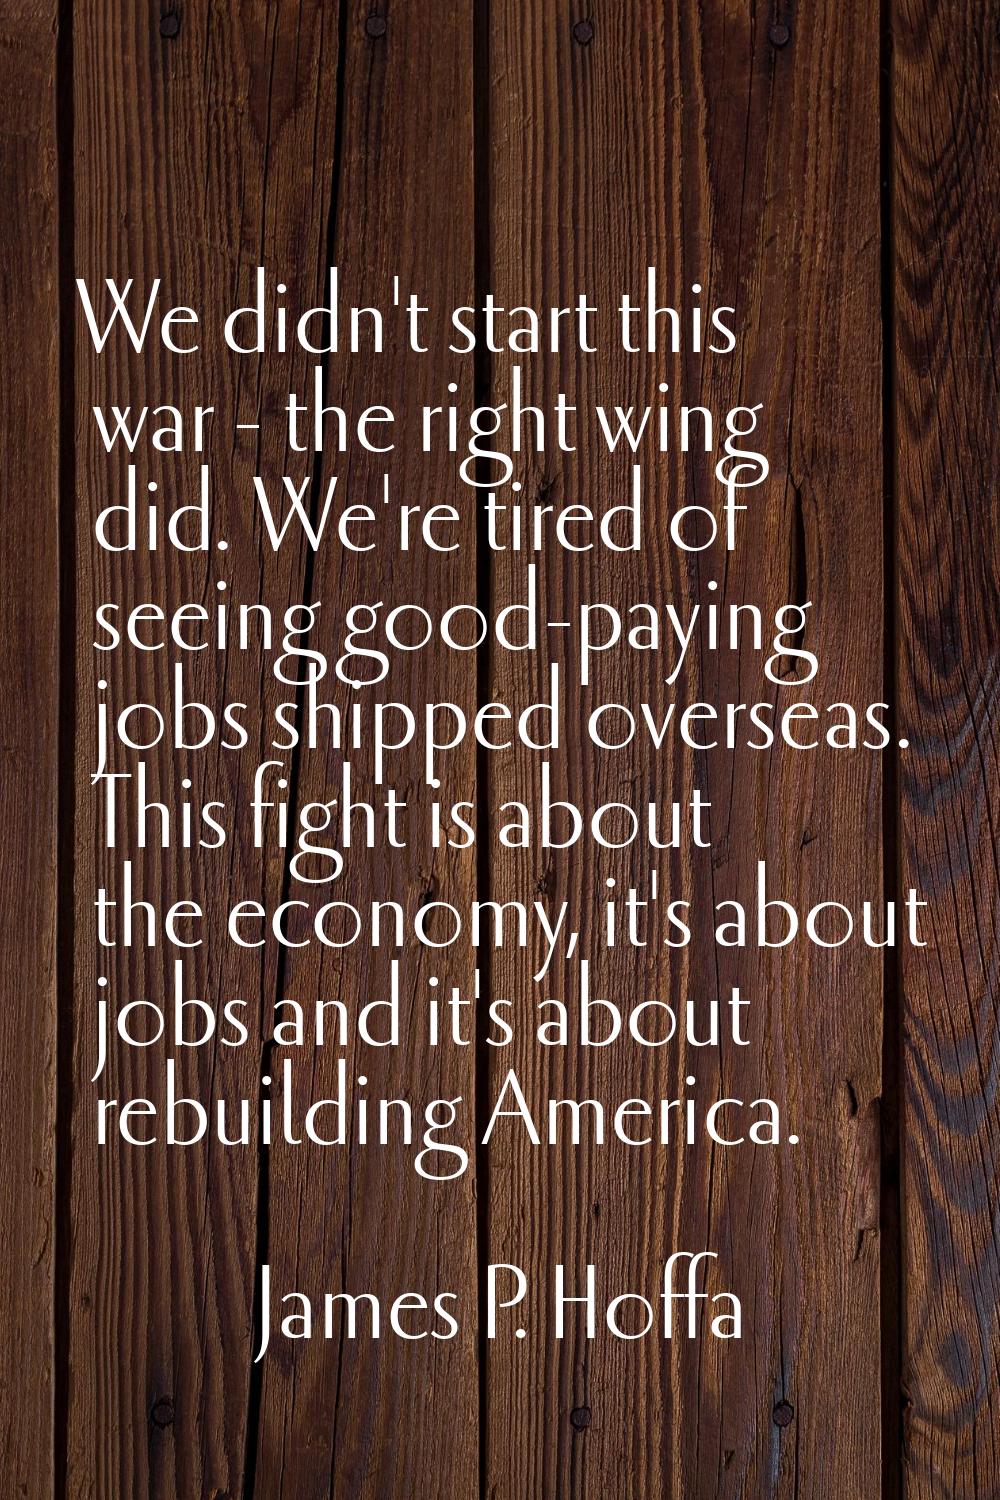 We didn't start this war - the right wing did. We're tired of seeing good-paying jobs shipped overs